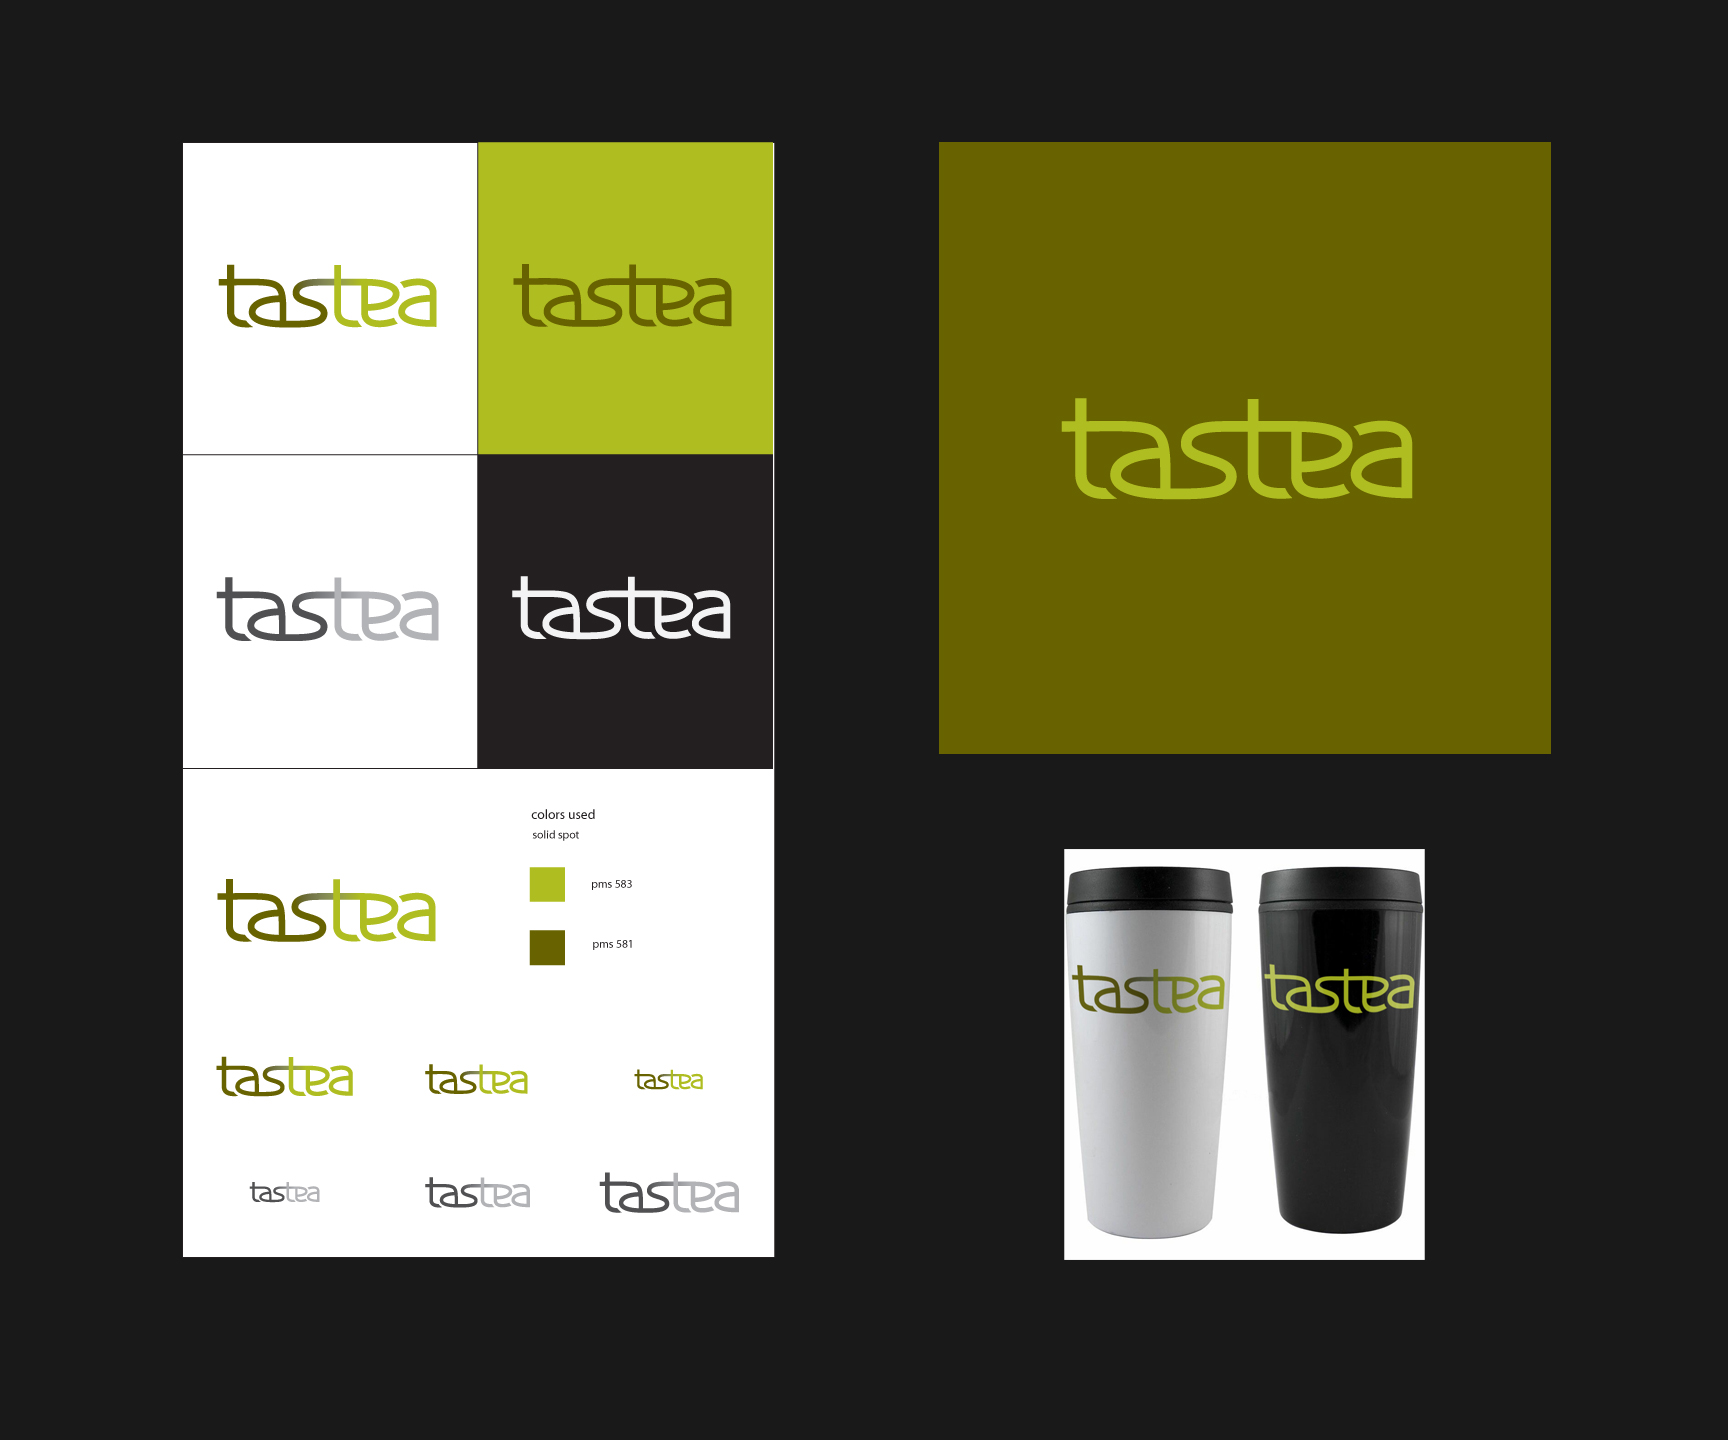  A full brand identity for an imagined tea business. Includes earthy tones and a contemporary custom sans serif logotype to attract a younger audience. (2012) 